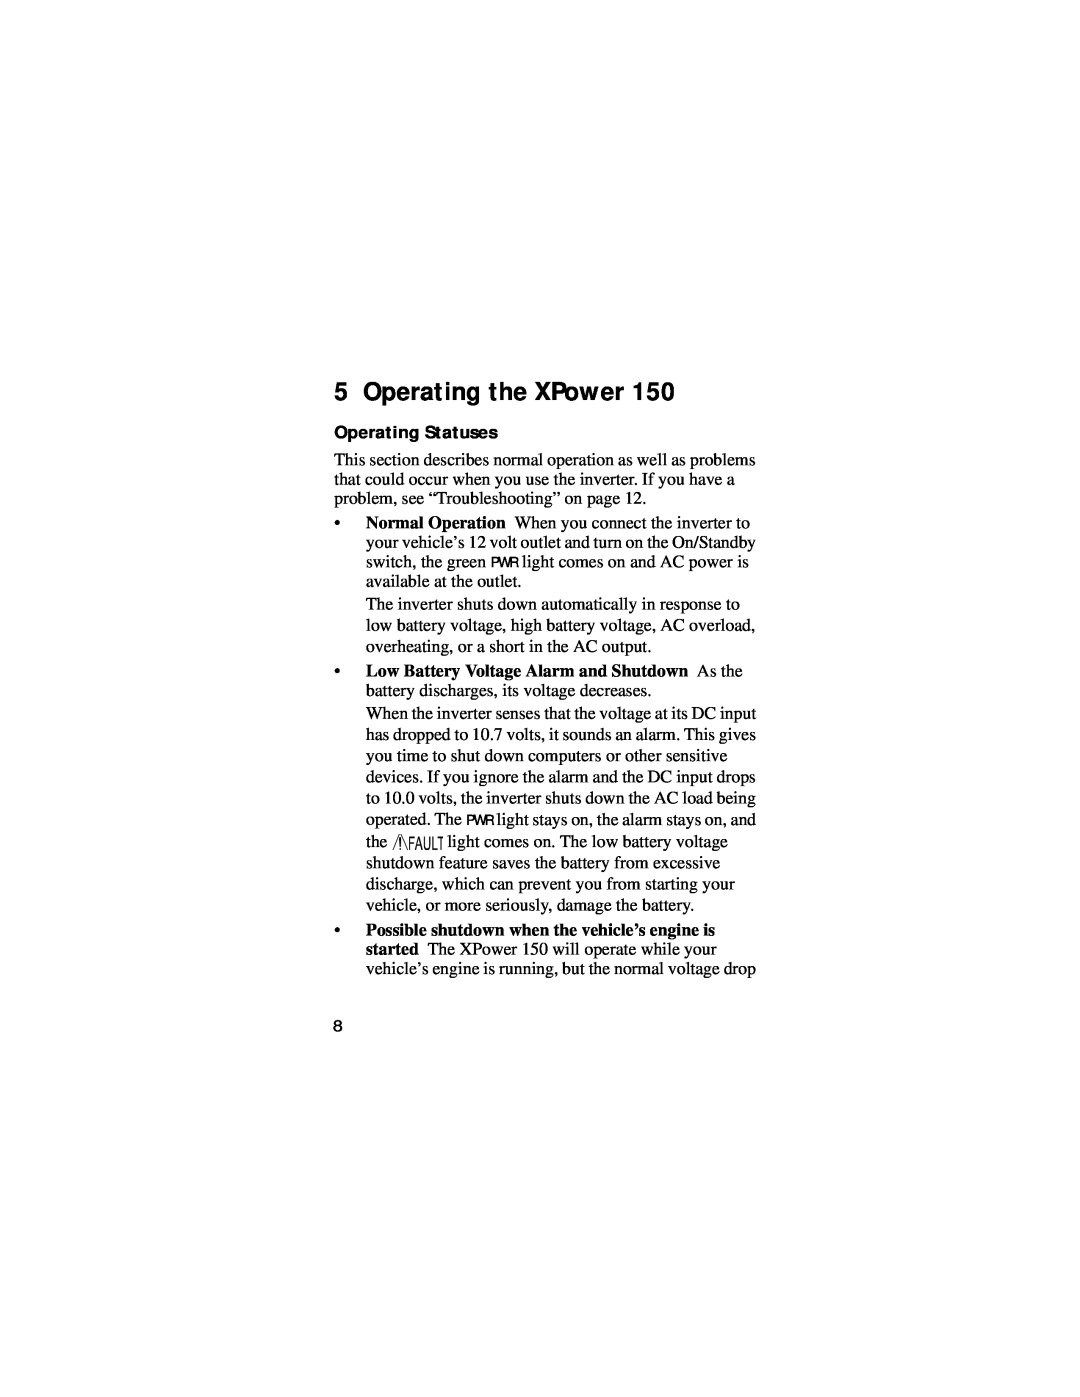 Xantrex Technology 150 manual Operating the XPower, Operating Statuses 